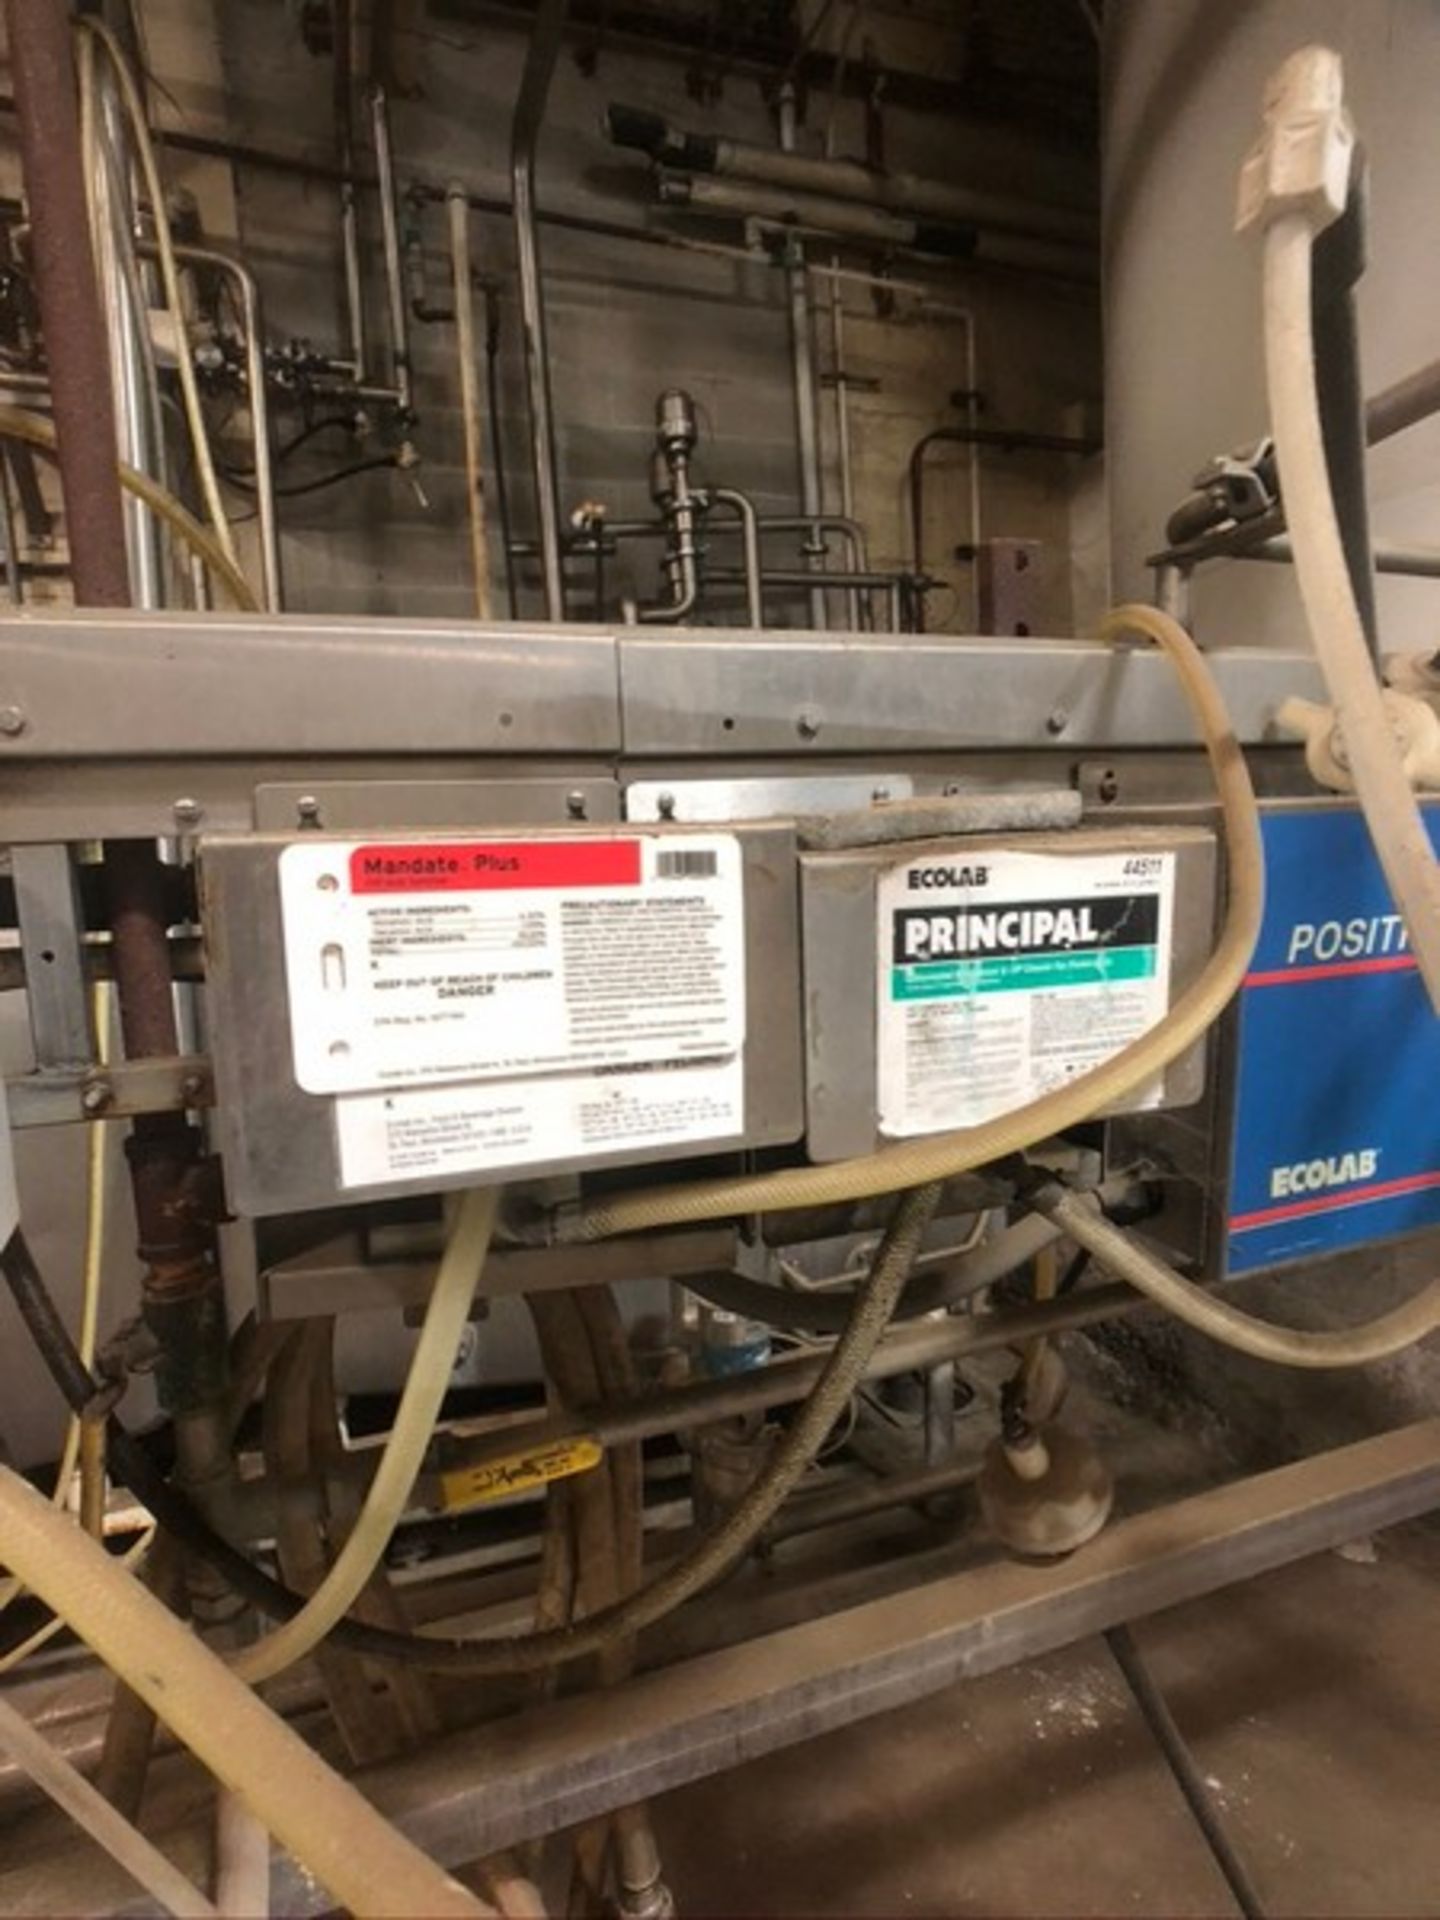 SANITATION AND CHEMICAL DOSING SYSTEM MOUNTED ON S/S RACK WITH ECOLAB POSITRONIC IV AND PROMINENT - Image 8 of 9